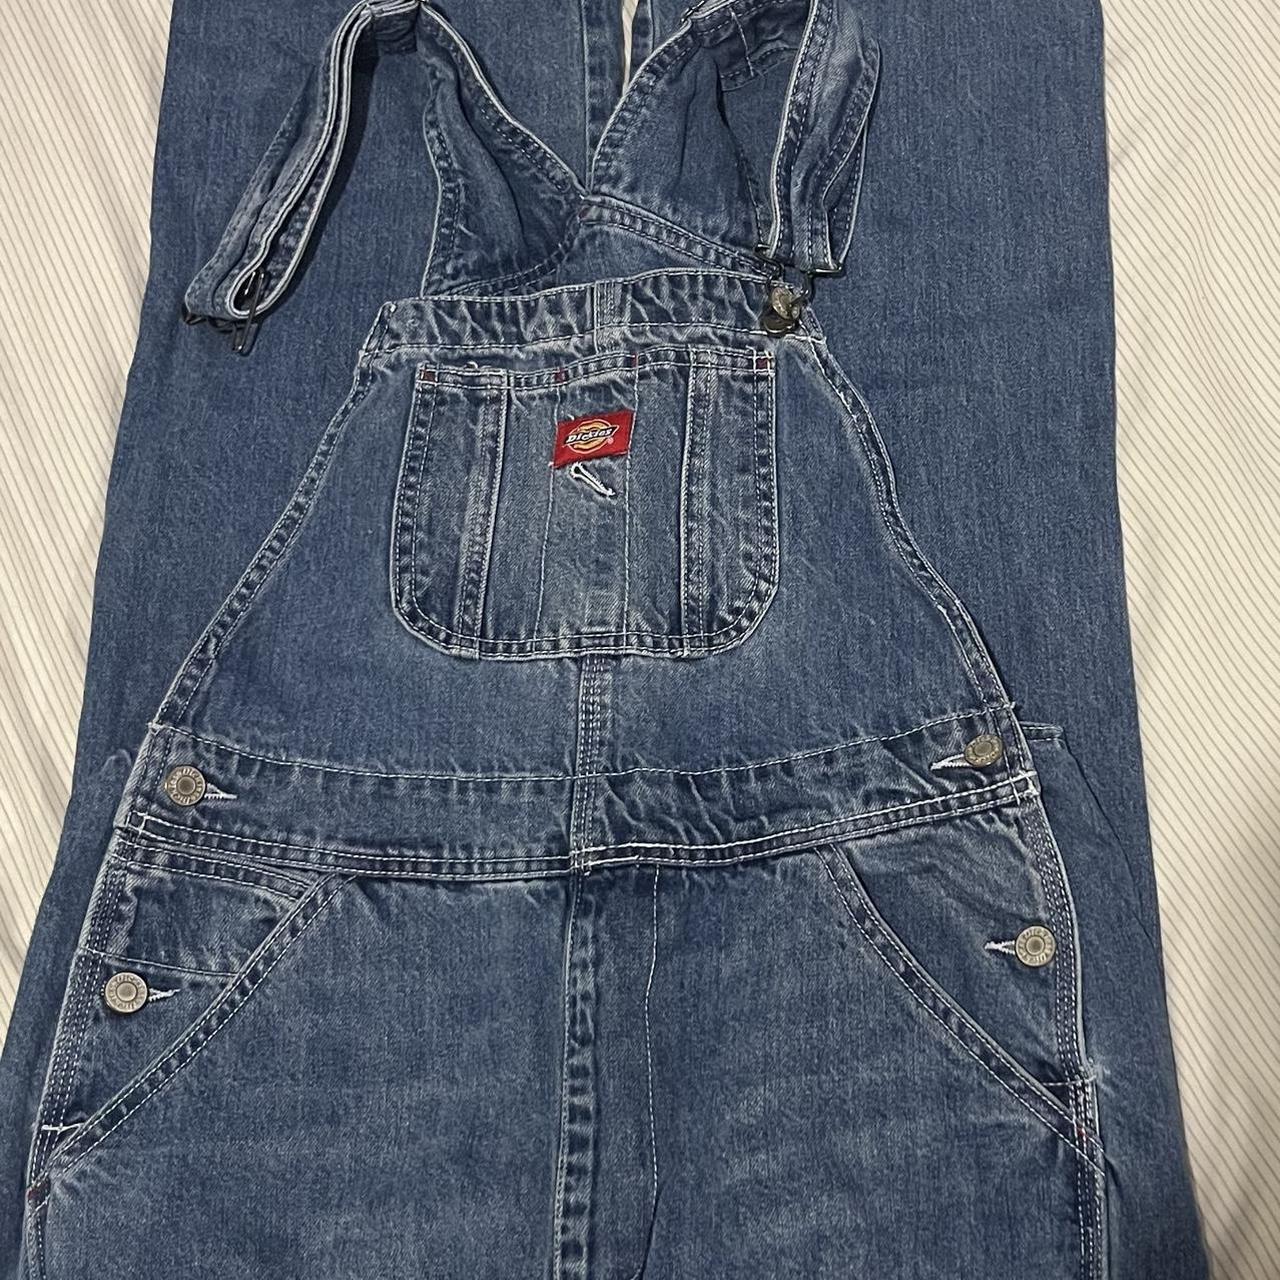 Dickies Cargo Overalls 🚜 missing button on left side - Depop